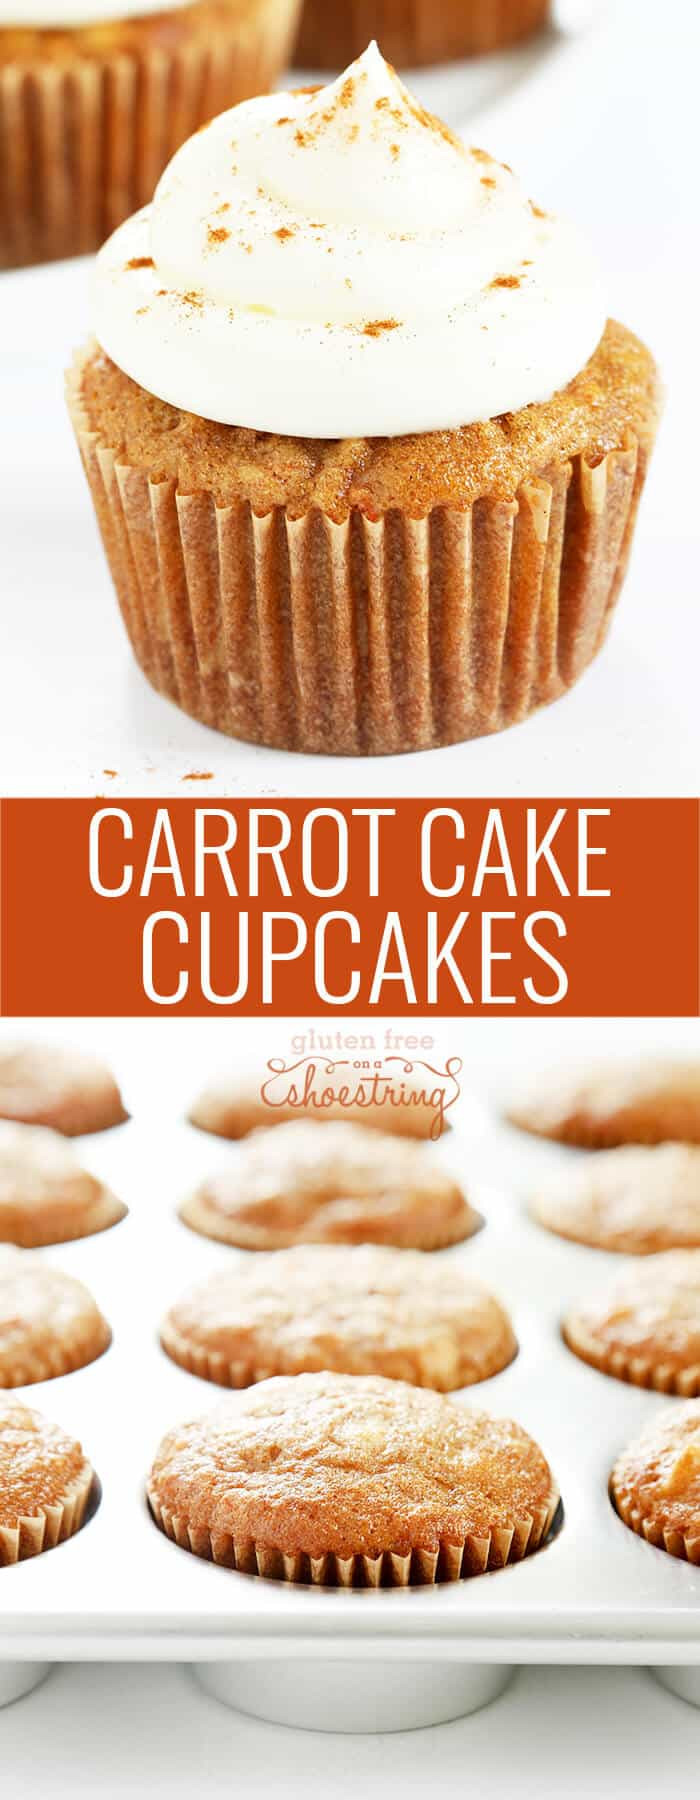 Gluten Free Carrot Cake Muffins
 Gluten Free Carrot Cake Cupcakes with Cream Cheese Frosting